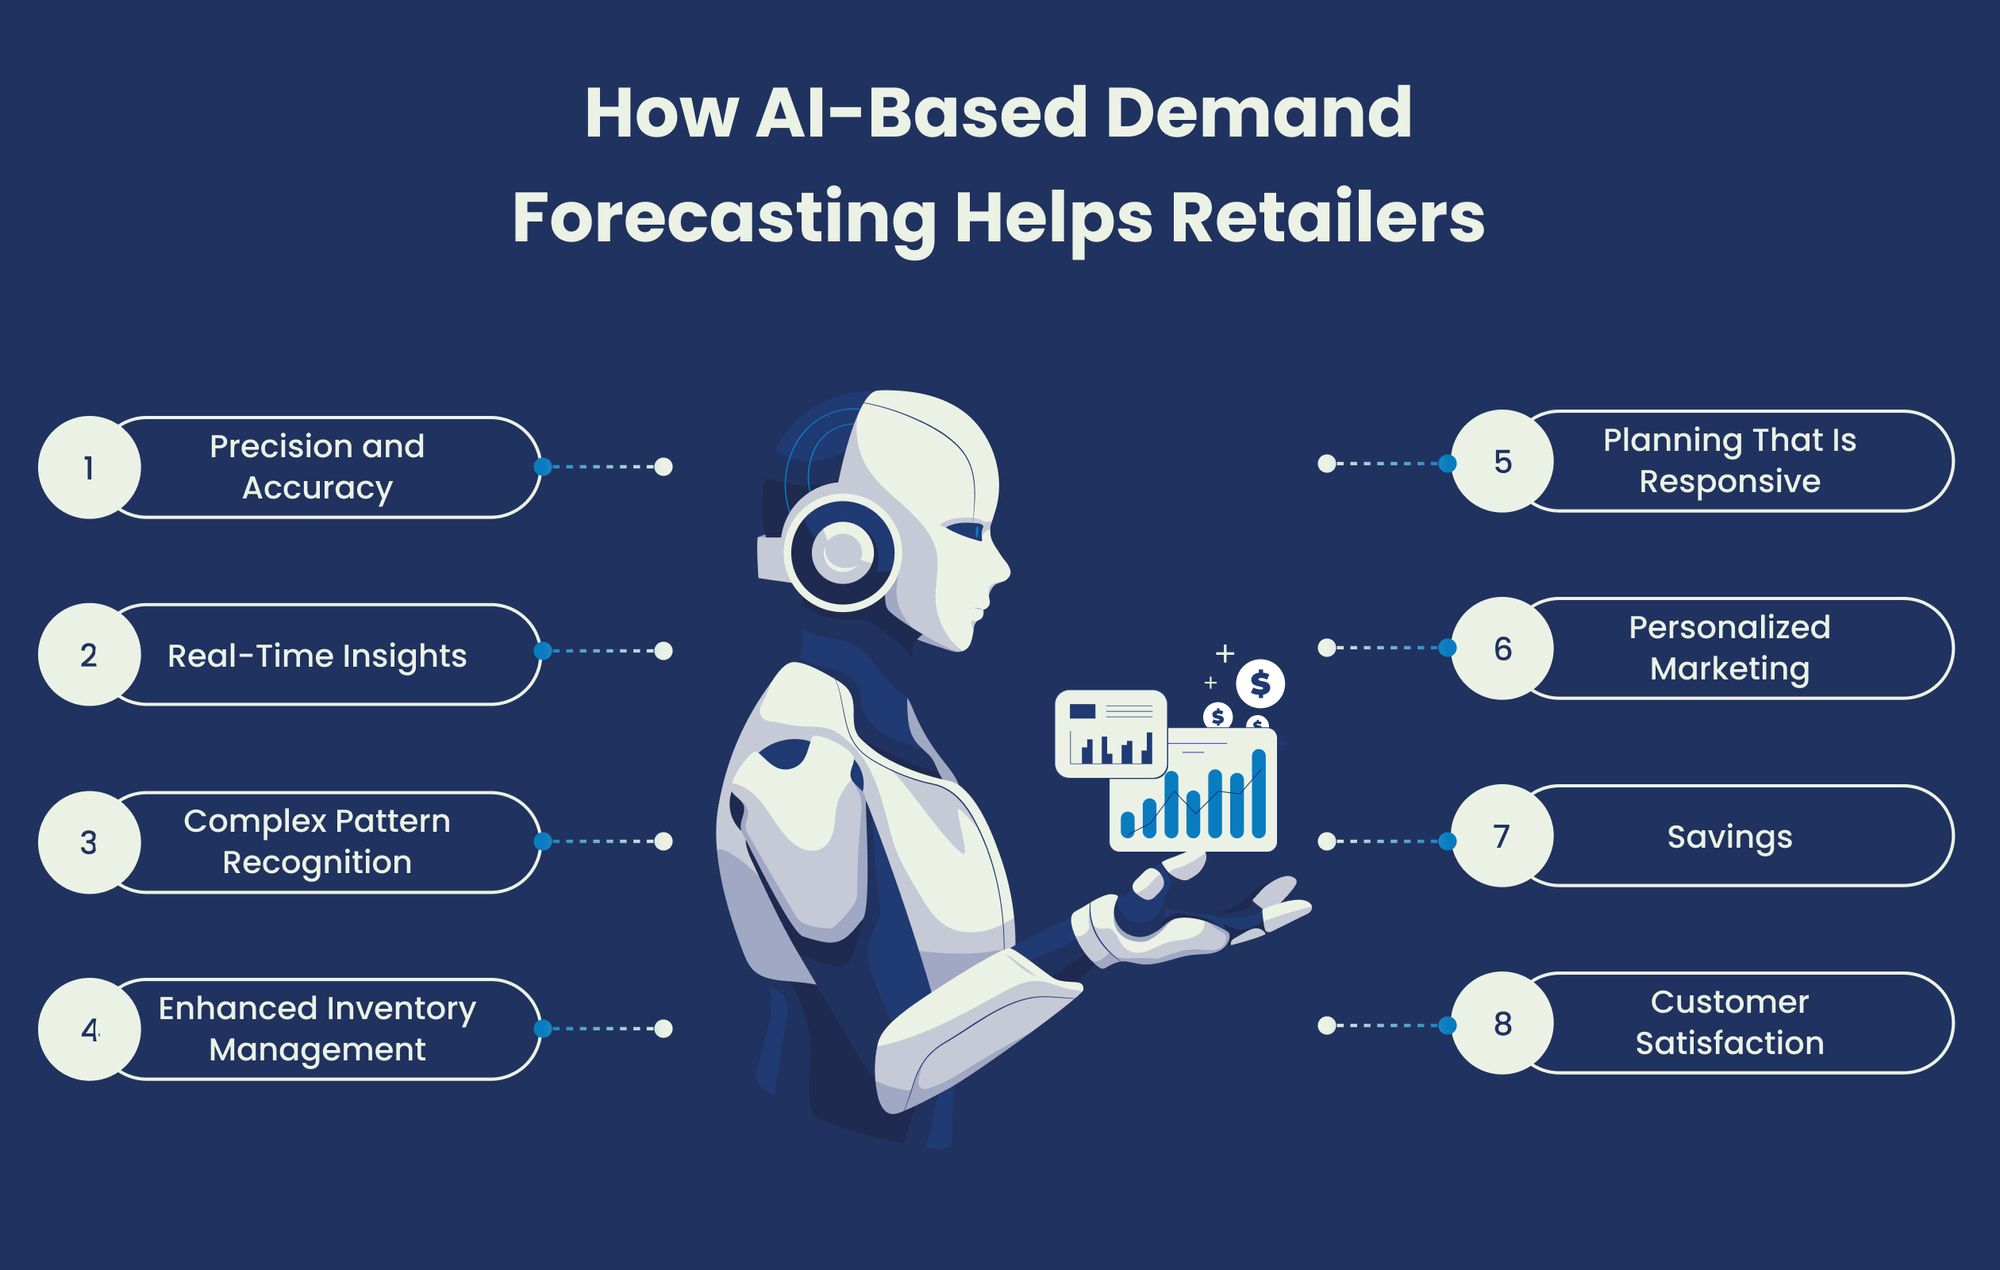 How AI-Based Demand Forecasting Helps Retailers